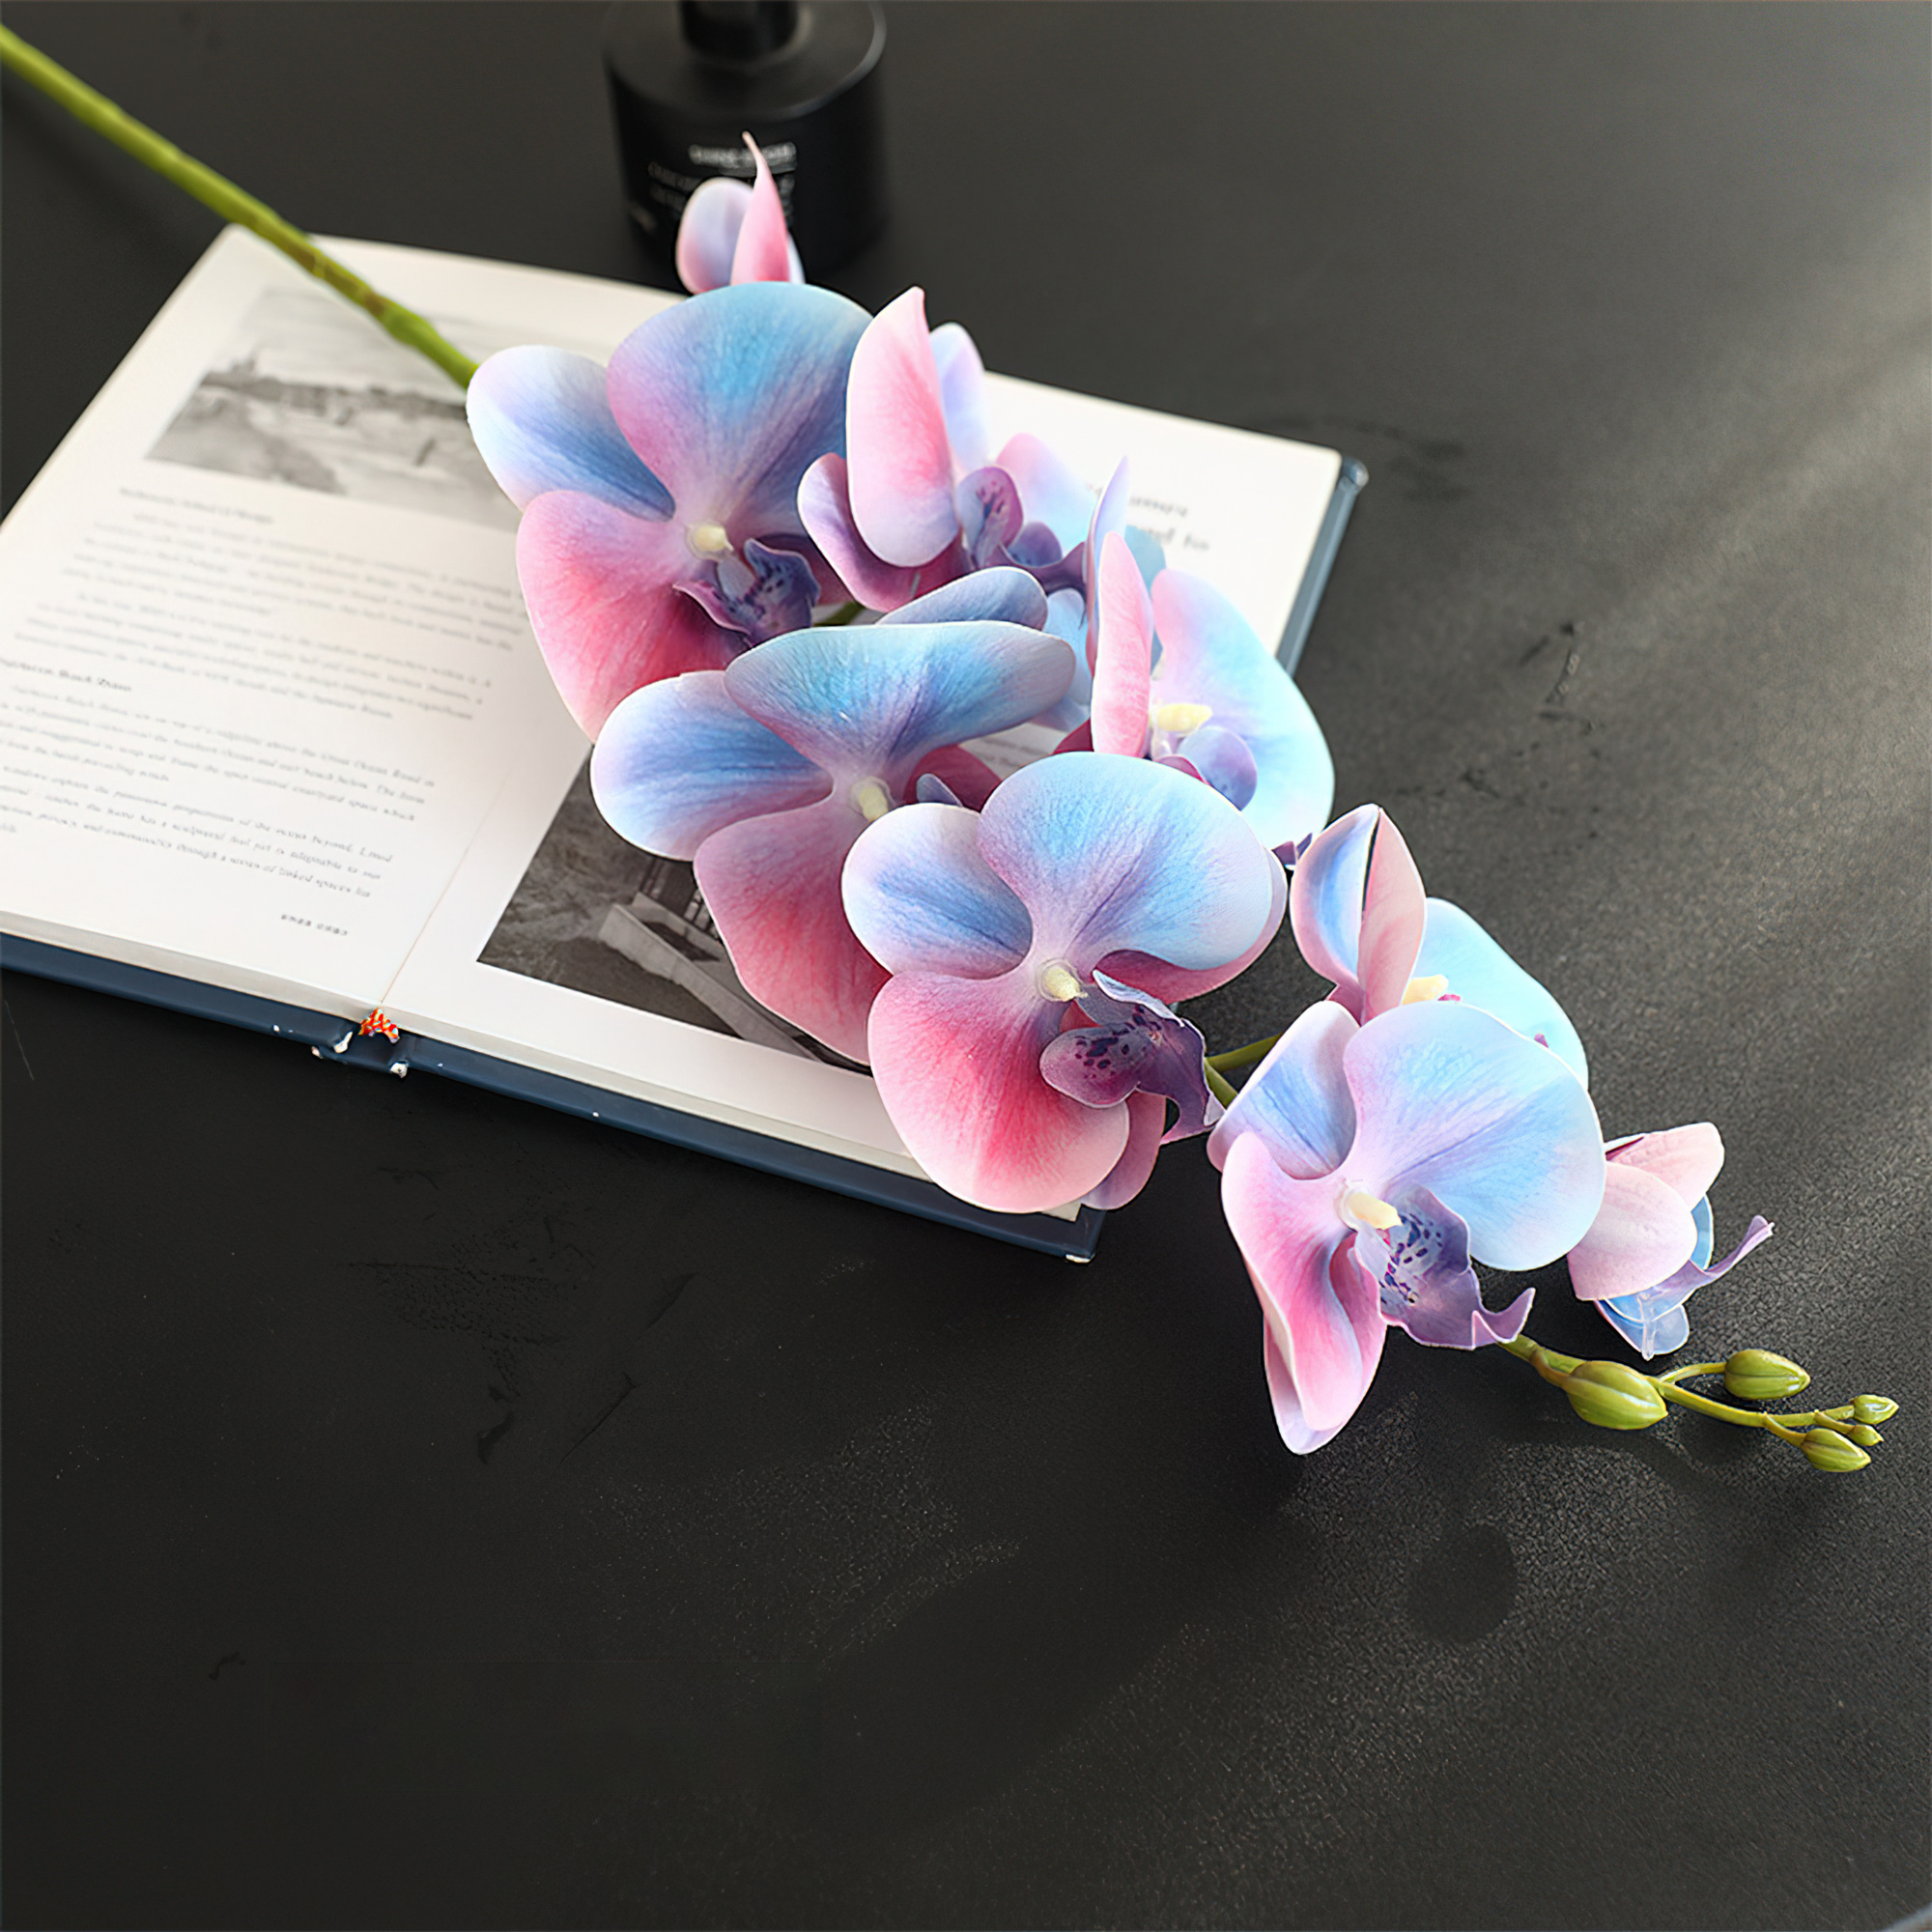 ValarFlower Personalized 3D Printed Multicolor Orchids, 9-Heads Phalaenopsis Arrangement for Wedding and Home Decor Accent Gifts